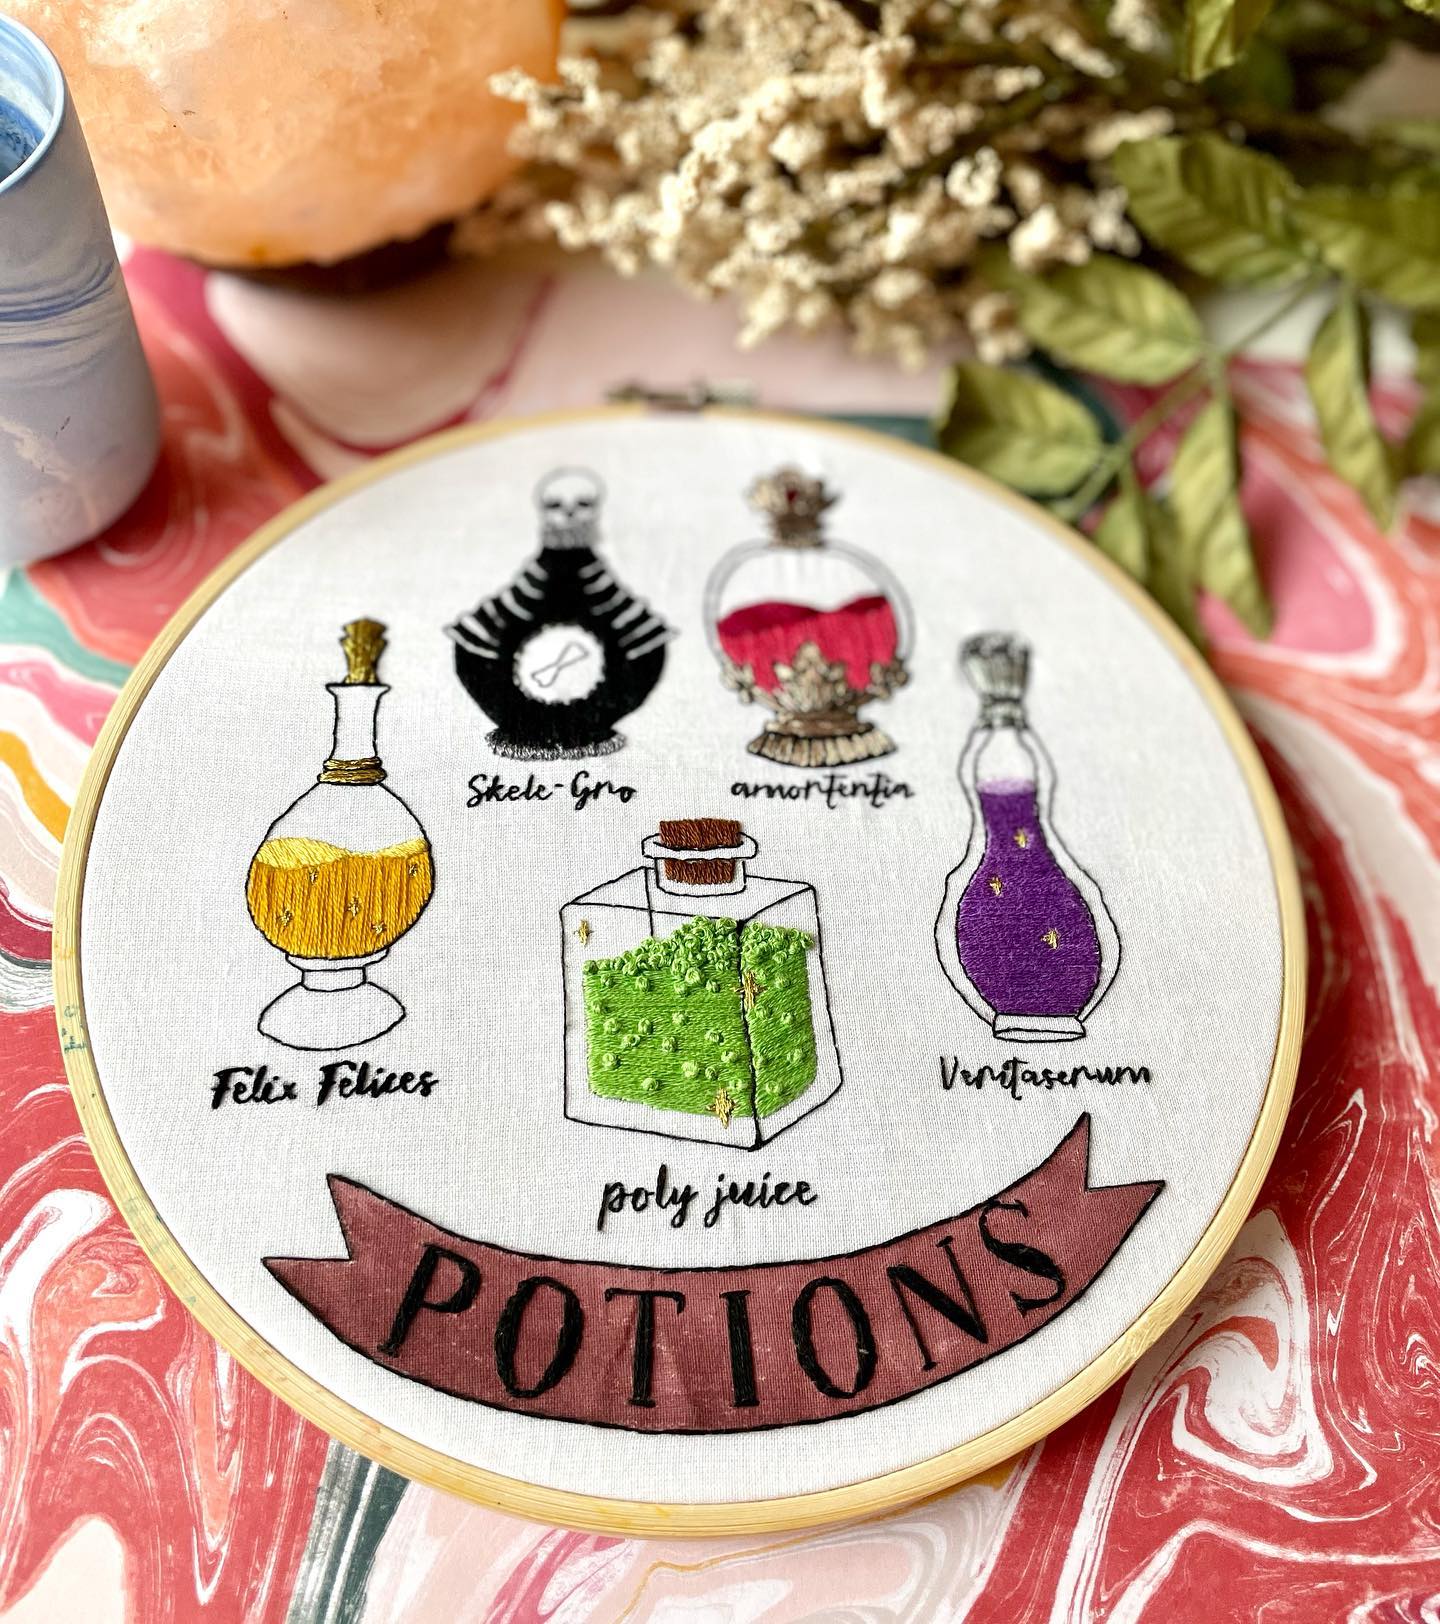 PDF-Magic Collection, all 4 Harry Potter Patterns!